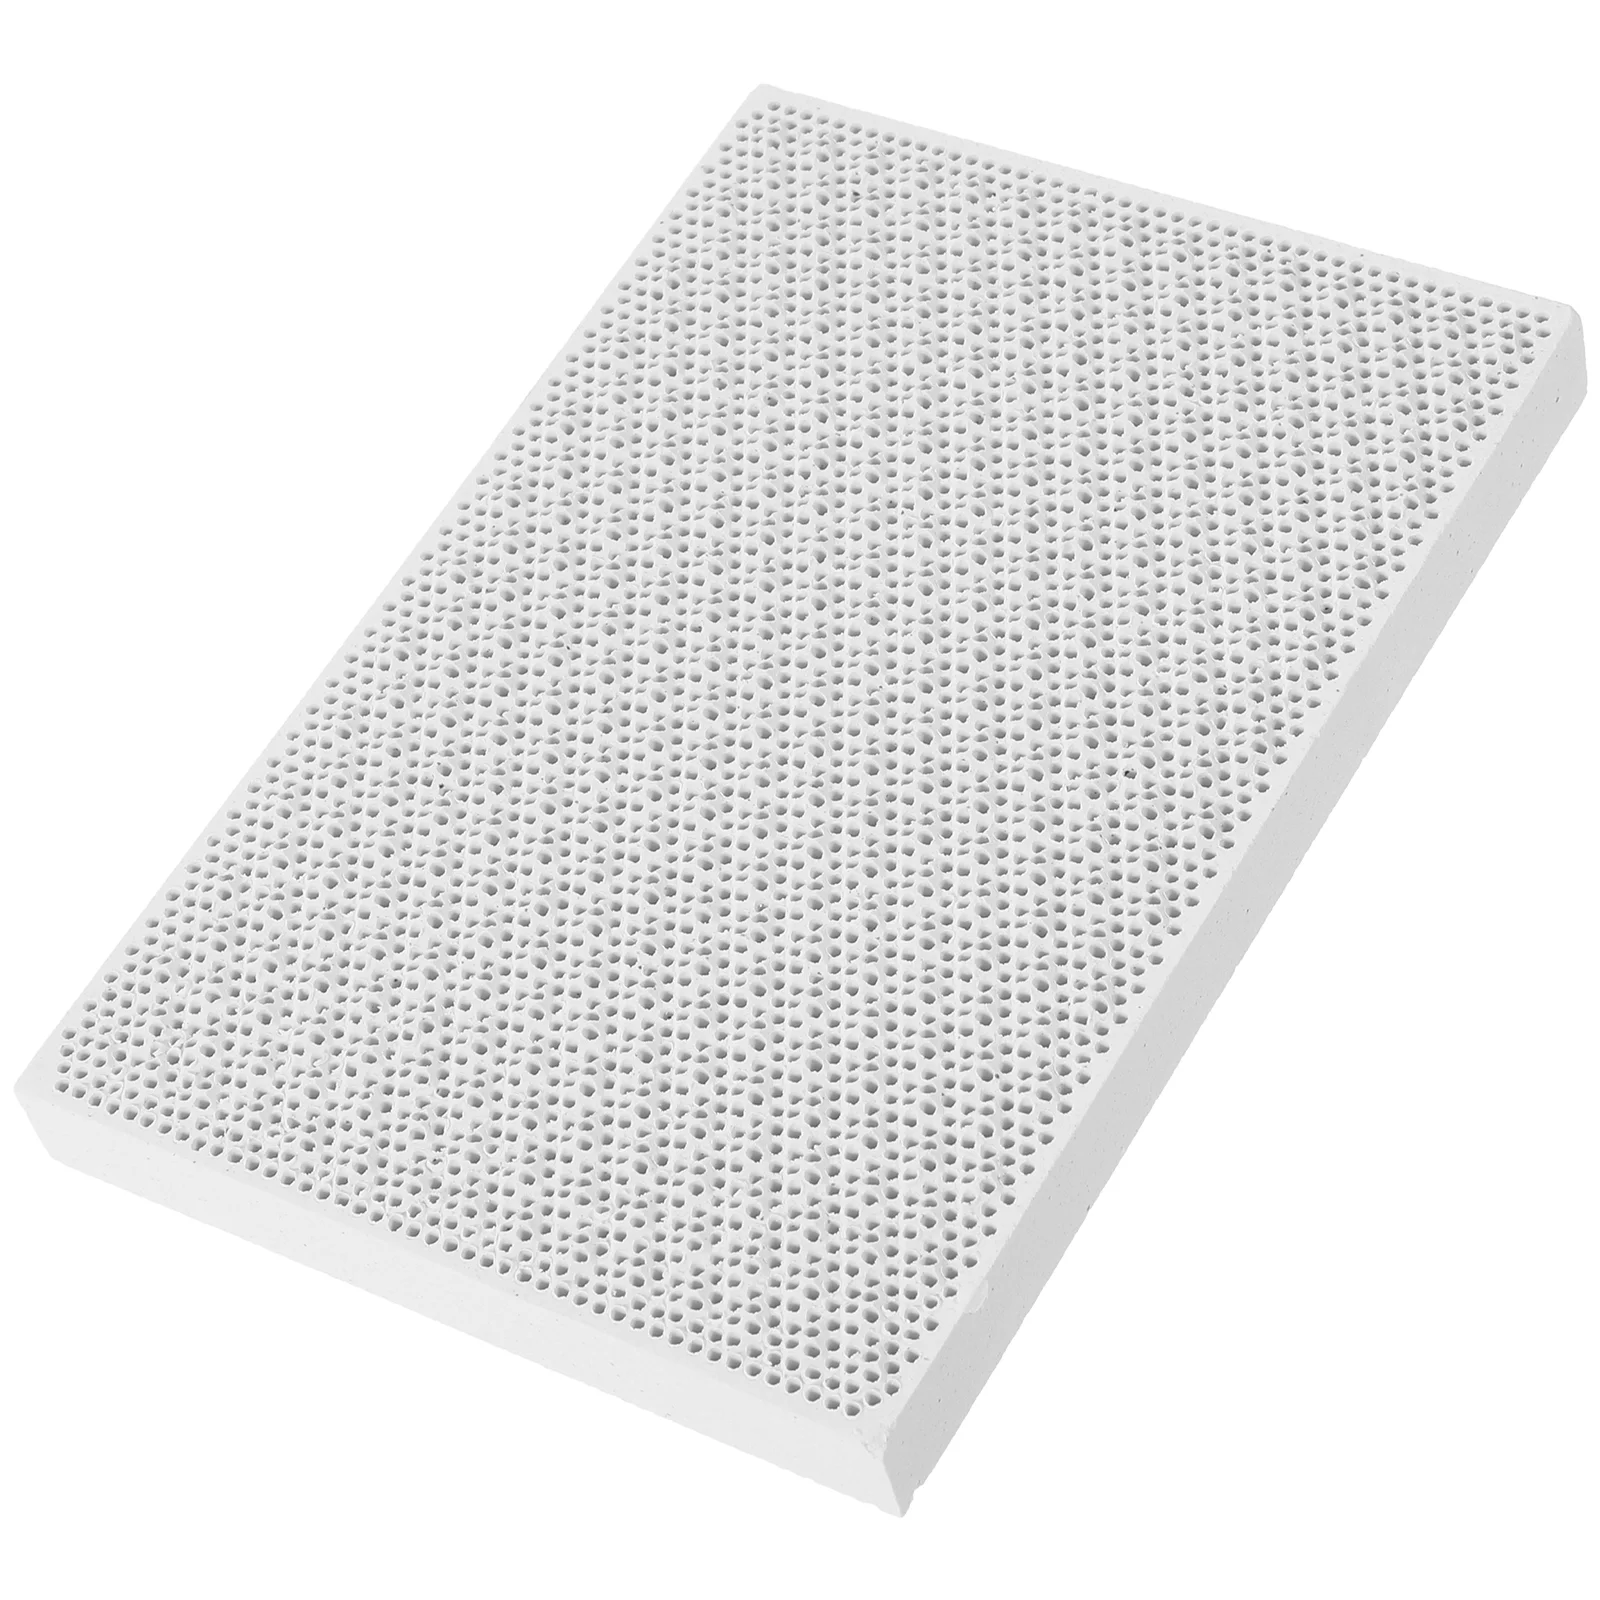 

Insulation Welding Tile Backing Plate Soldering Boards Honeycomb Panel Parts for Jewelry High Temperature Resistance